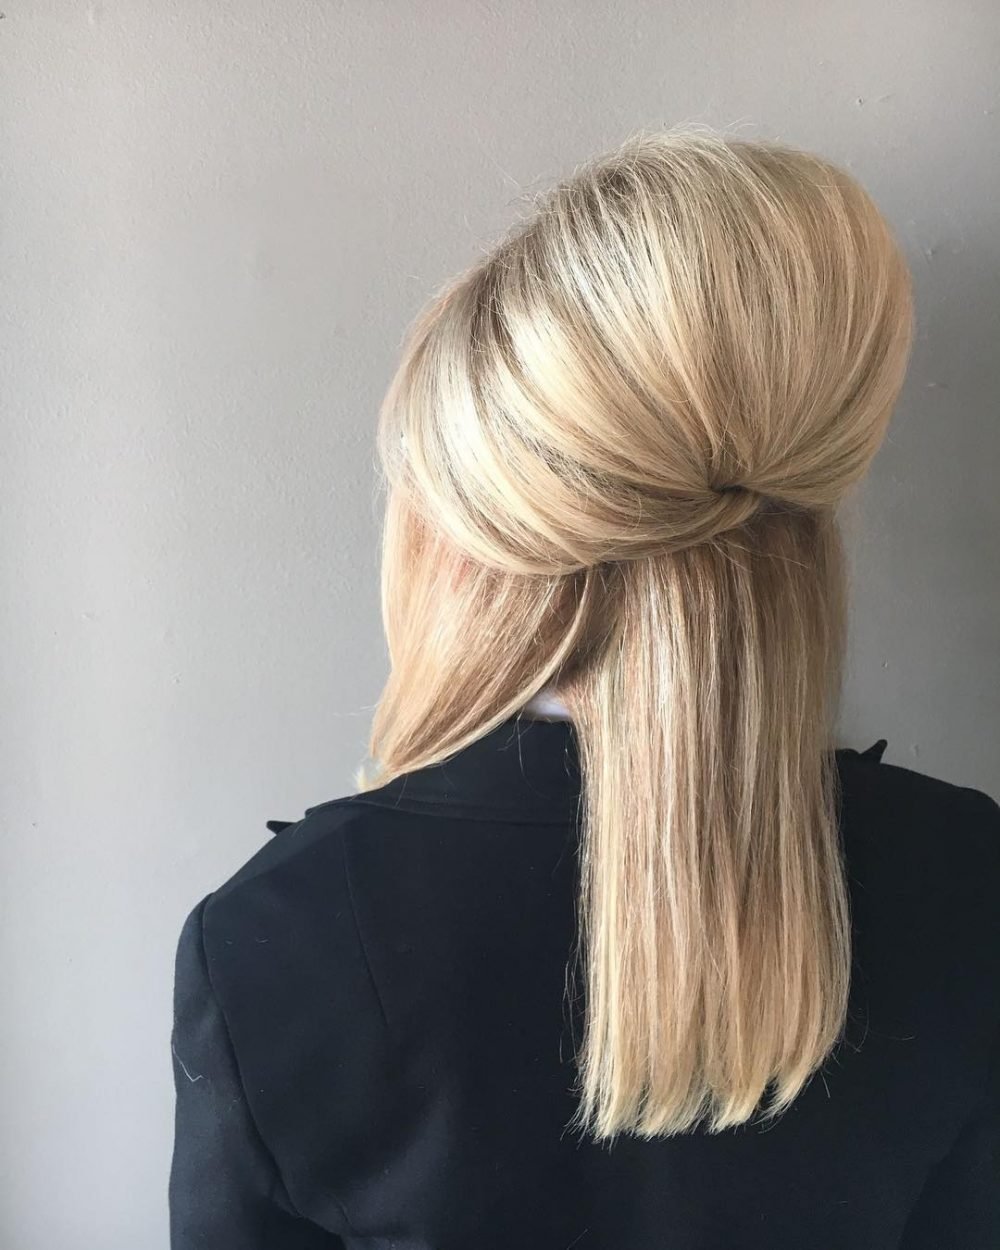 37 Popular Party Hairstyles That Are Easy to Style